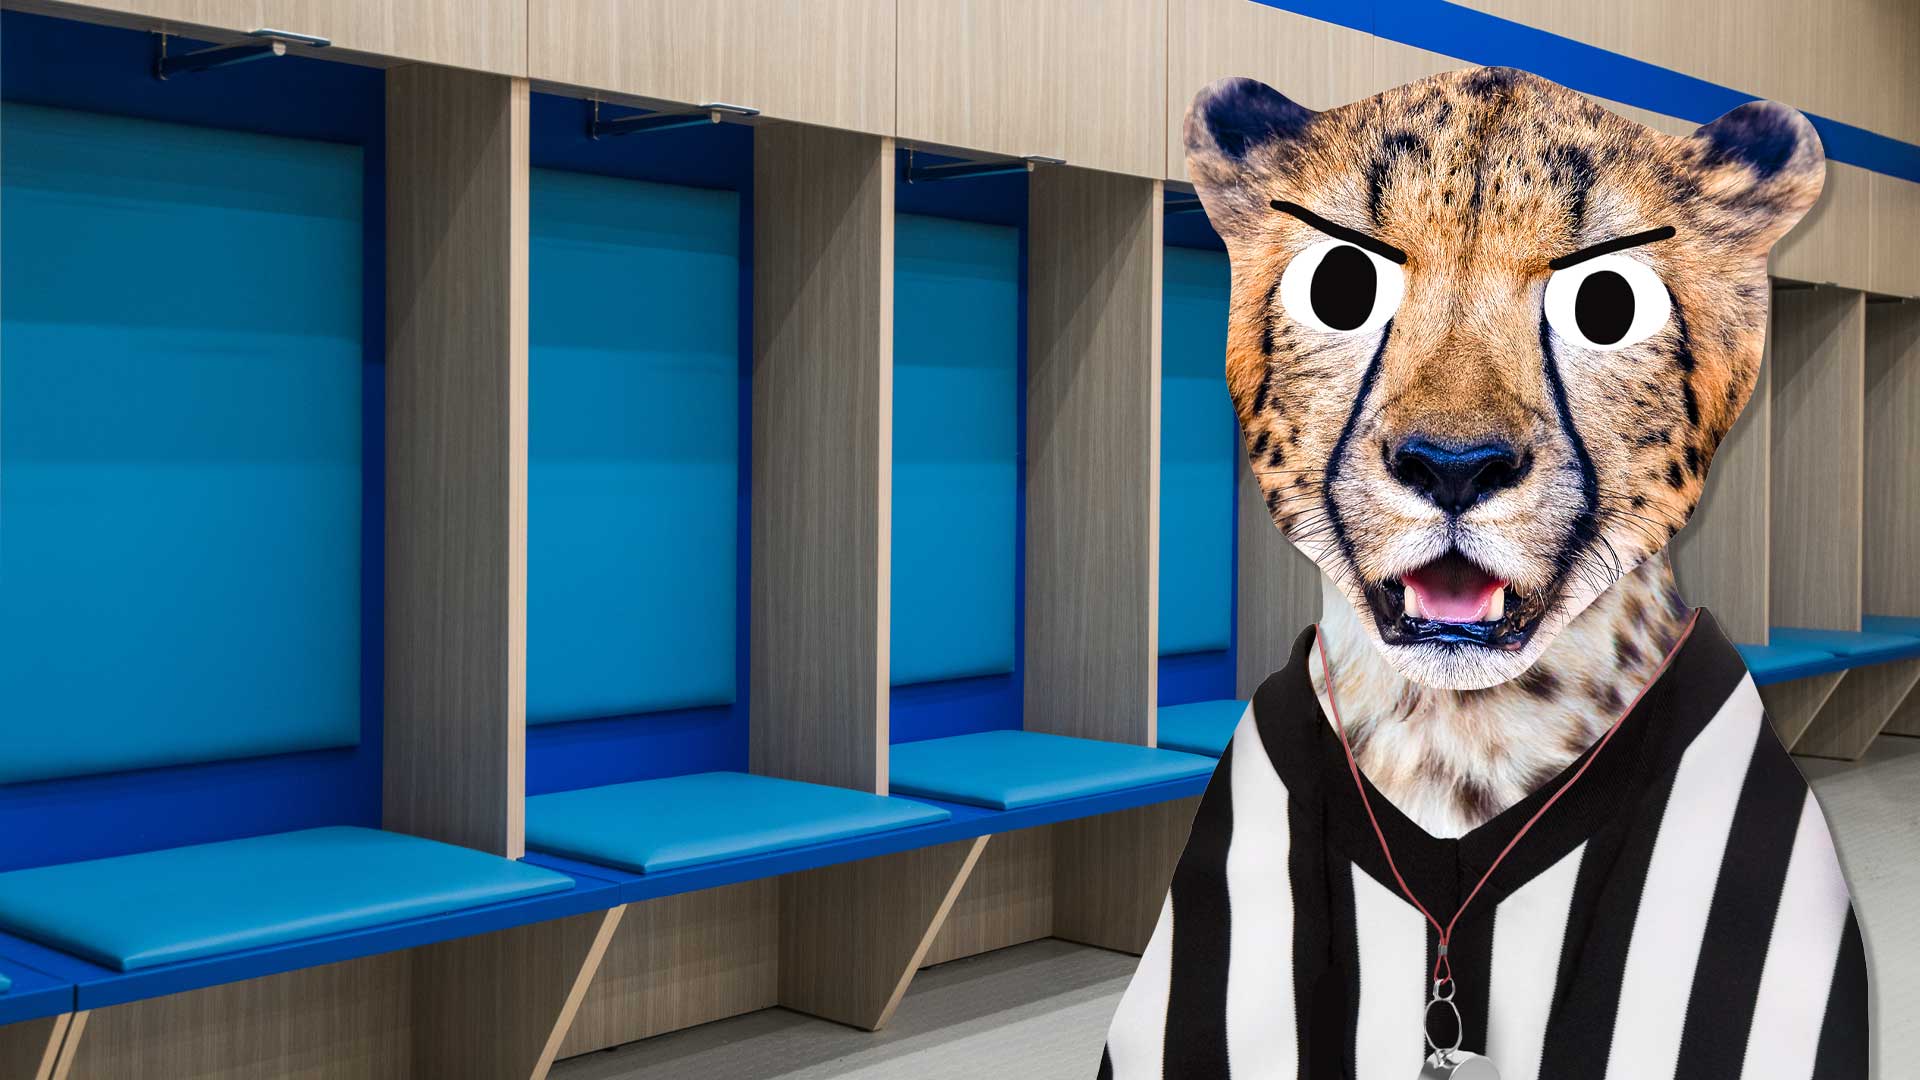 A football changing room with a cheetah in a ref shirt